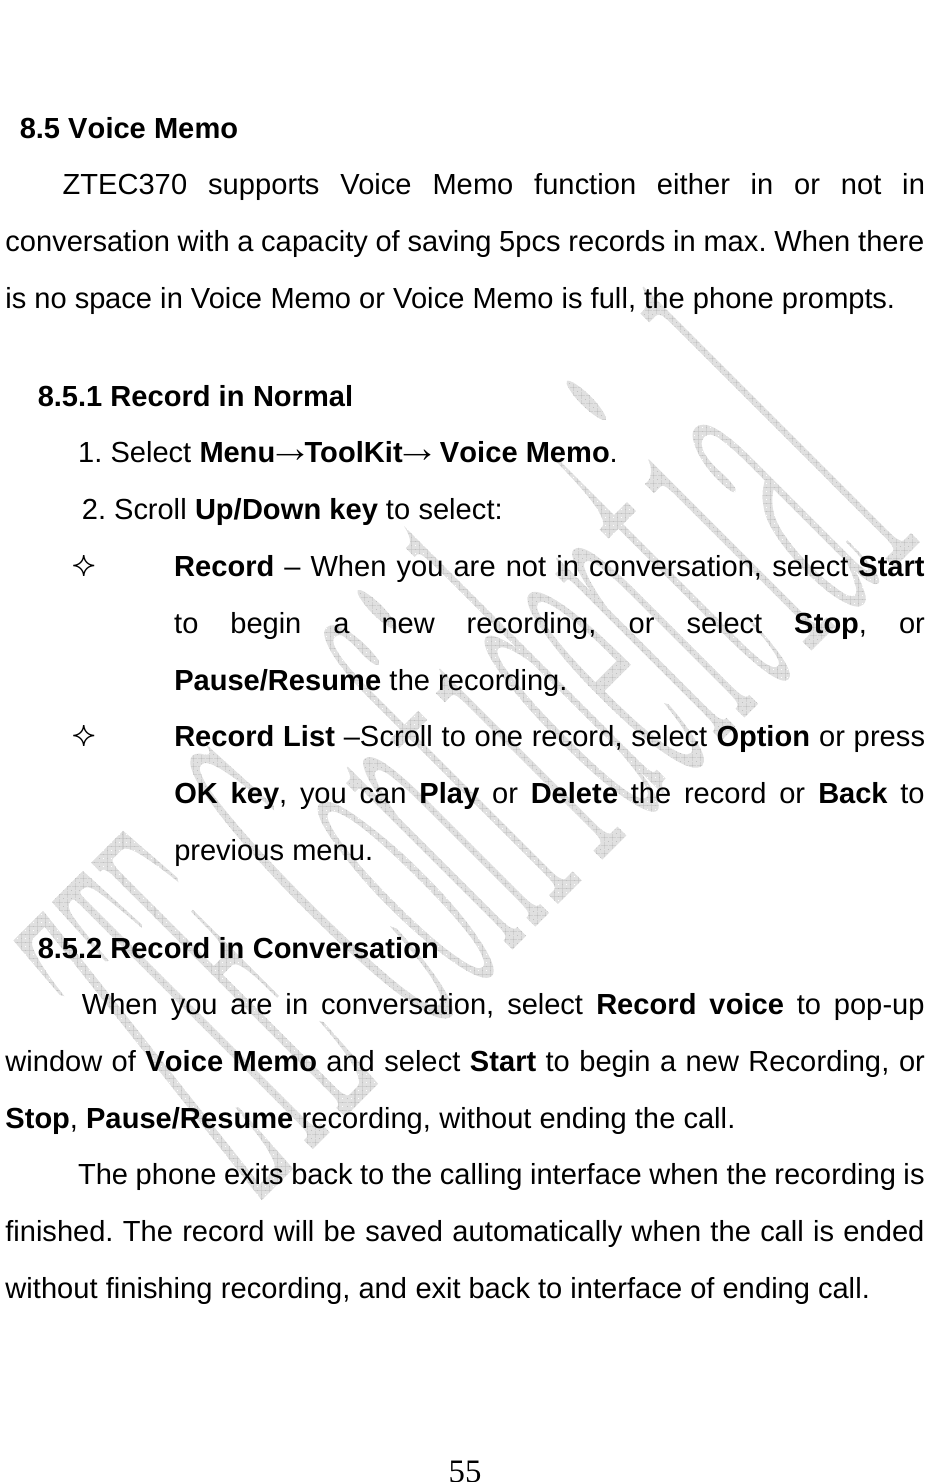                              558.5 Voice Memo ZTEC370 supports Voice Memo function either in or not in conversation with a capacity of saving 5pcs records in max. When there is no space in Voice Memo or Voice Memo is full, the phone prompts.   8.5.1 Record in Normal   1. Select Menu→ToolKit→ Voice Memo. 2. Scroll Up/Down key to select:  Record – When you are not in conversation, select Start to begin a new recording, or select Stop, or Pause/Resume the recording.  Record List –Scroll to one record, select Option or press OK key, you can Play or Delete the record or Back to previous menu. 8.5.2 Record in Conversation When you are in conversation, select Record voice to pop-up window of Voice Memo and select Start to begin a new Recording, or Stop, Pause/Resume recording, without ending the call. The phone exits back to the calling interface when the recording is finished. The record will be saved automatically when the call is ended without finishing recording, and exit back to interface of ending call.   